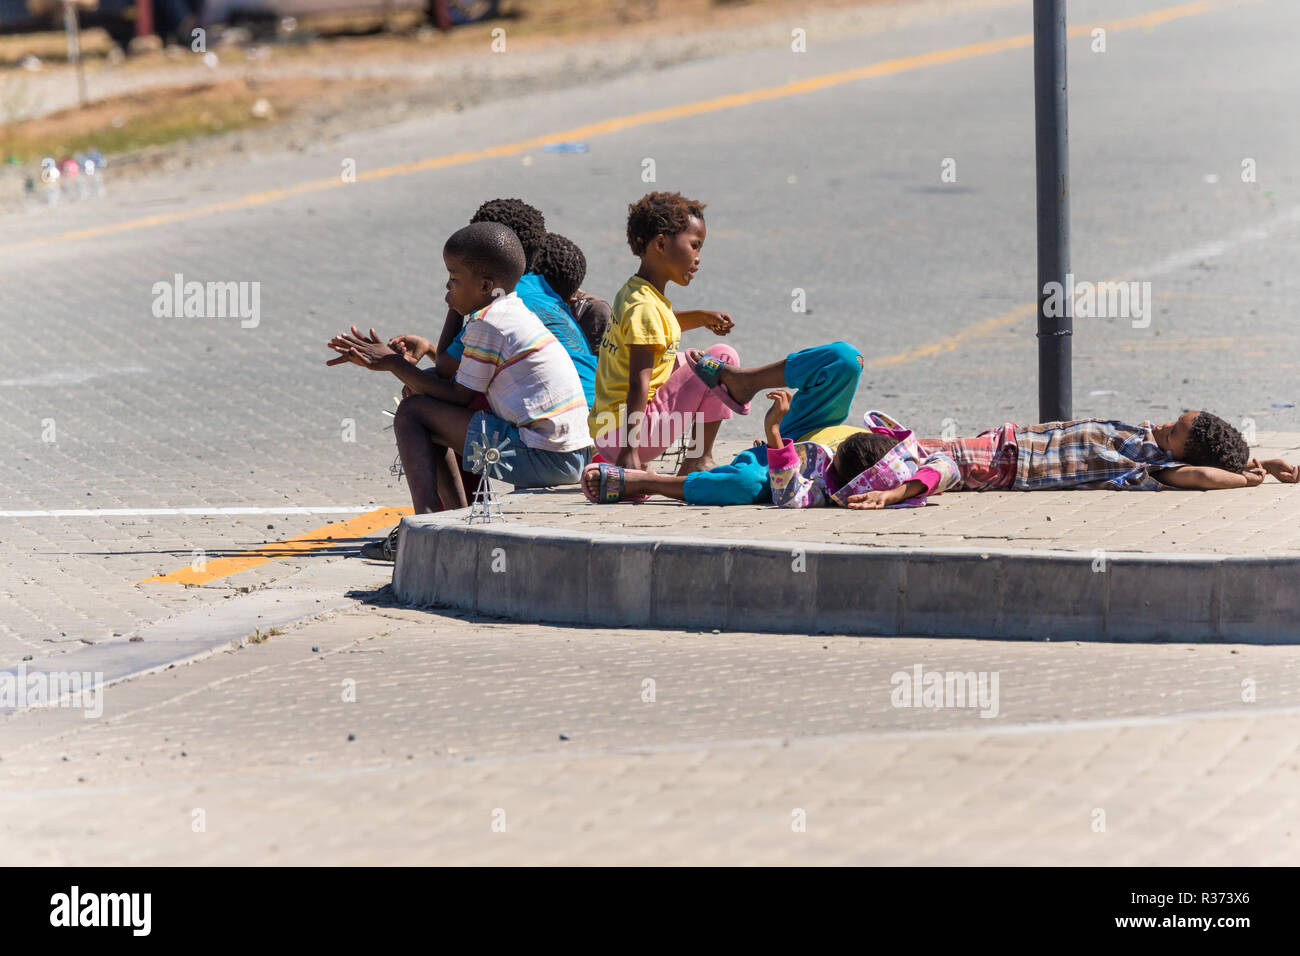 street kids or street children working by selling souvenirs on the side of the road in South Africa Stock Photo